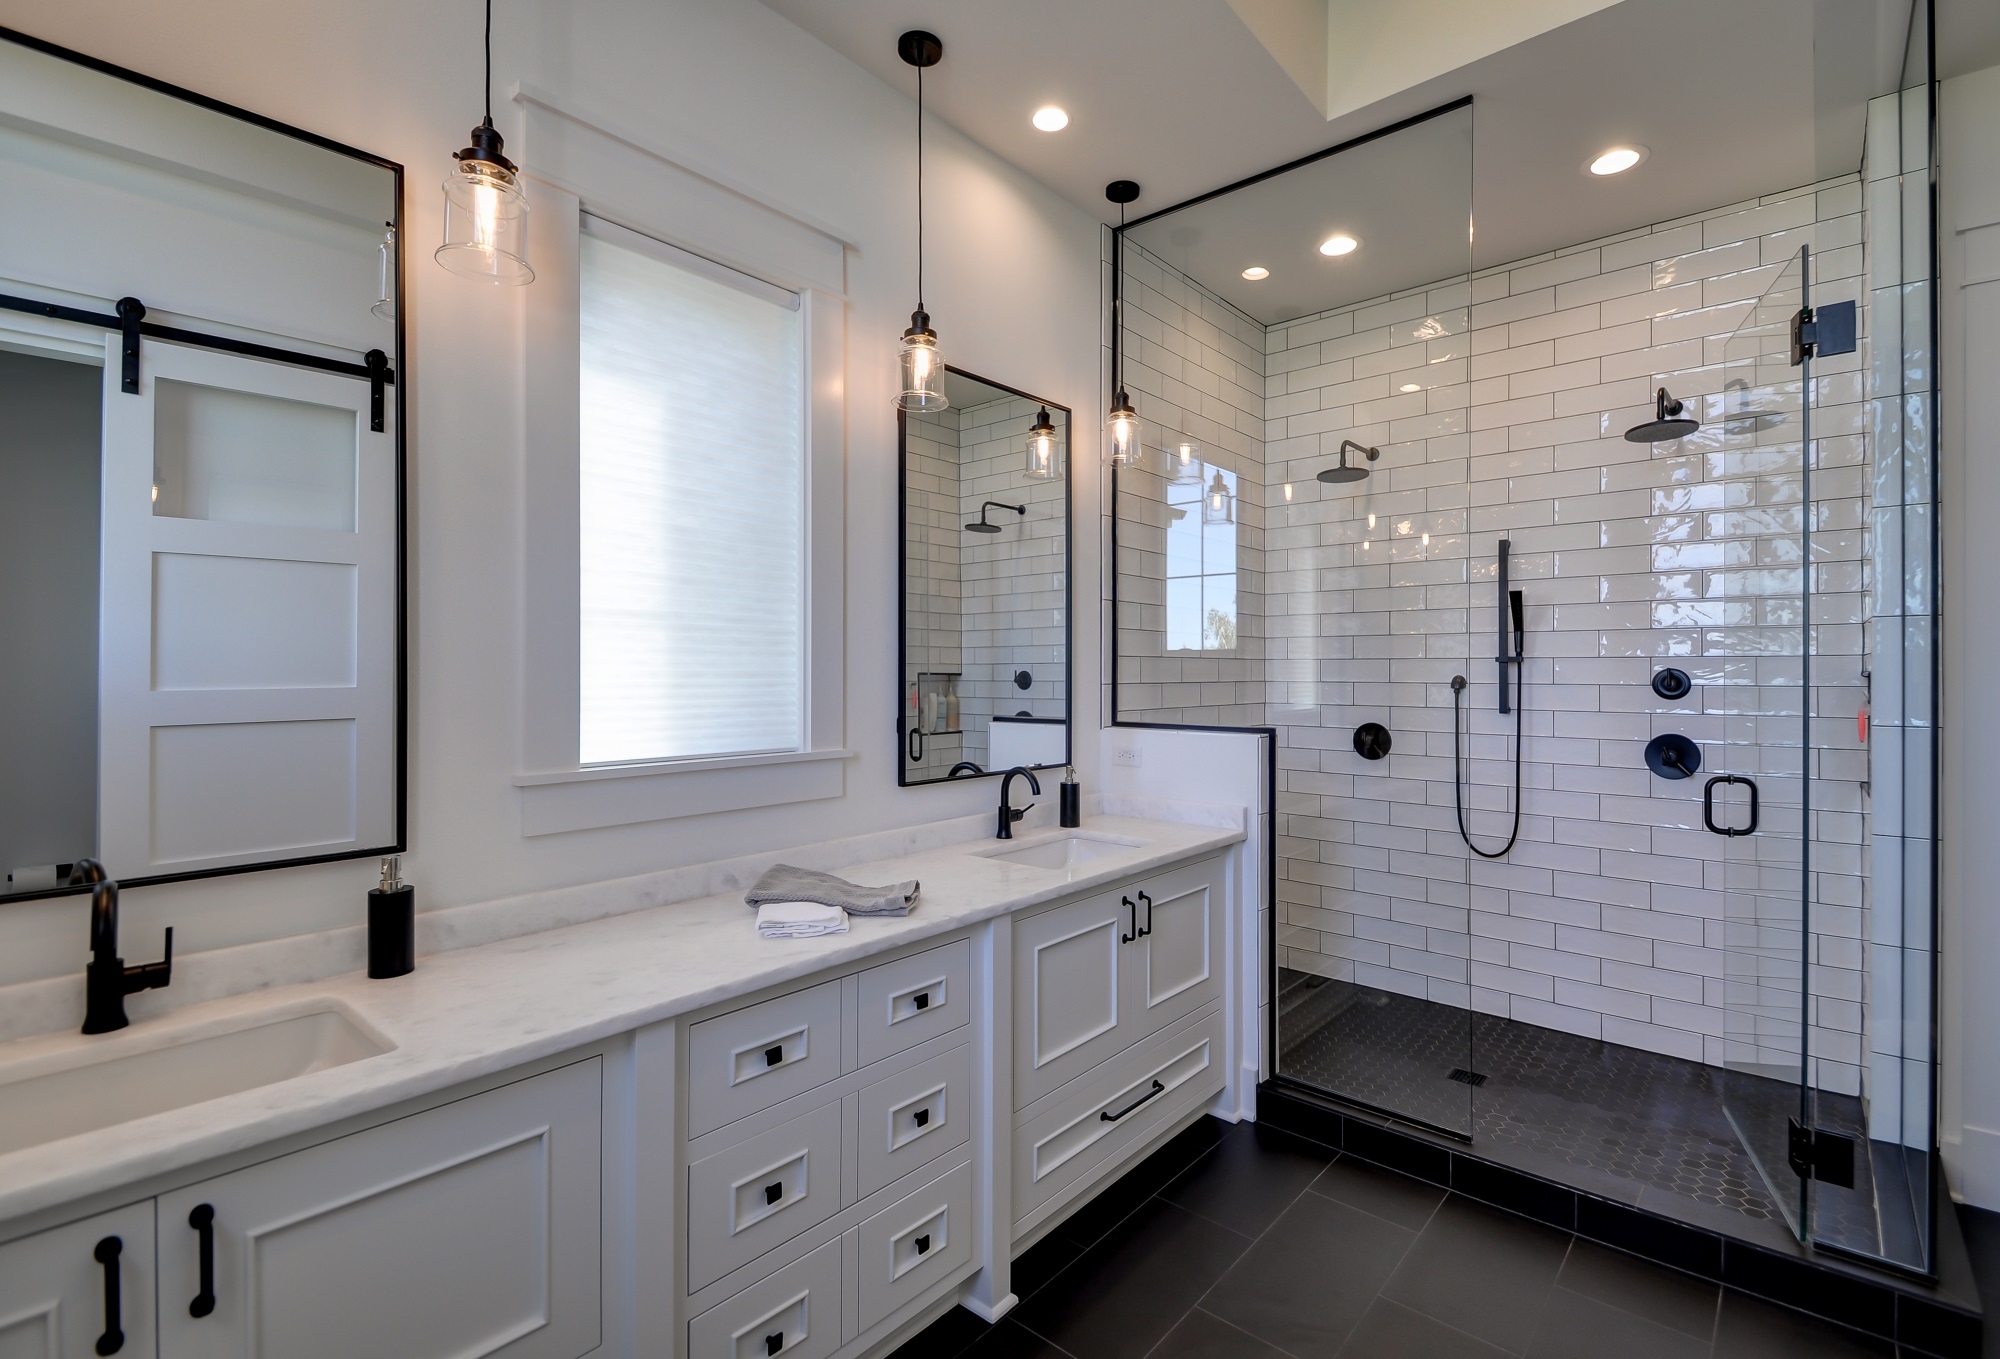 Modern bathroom with double vanity and walk-in shower.